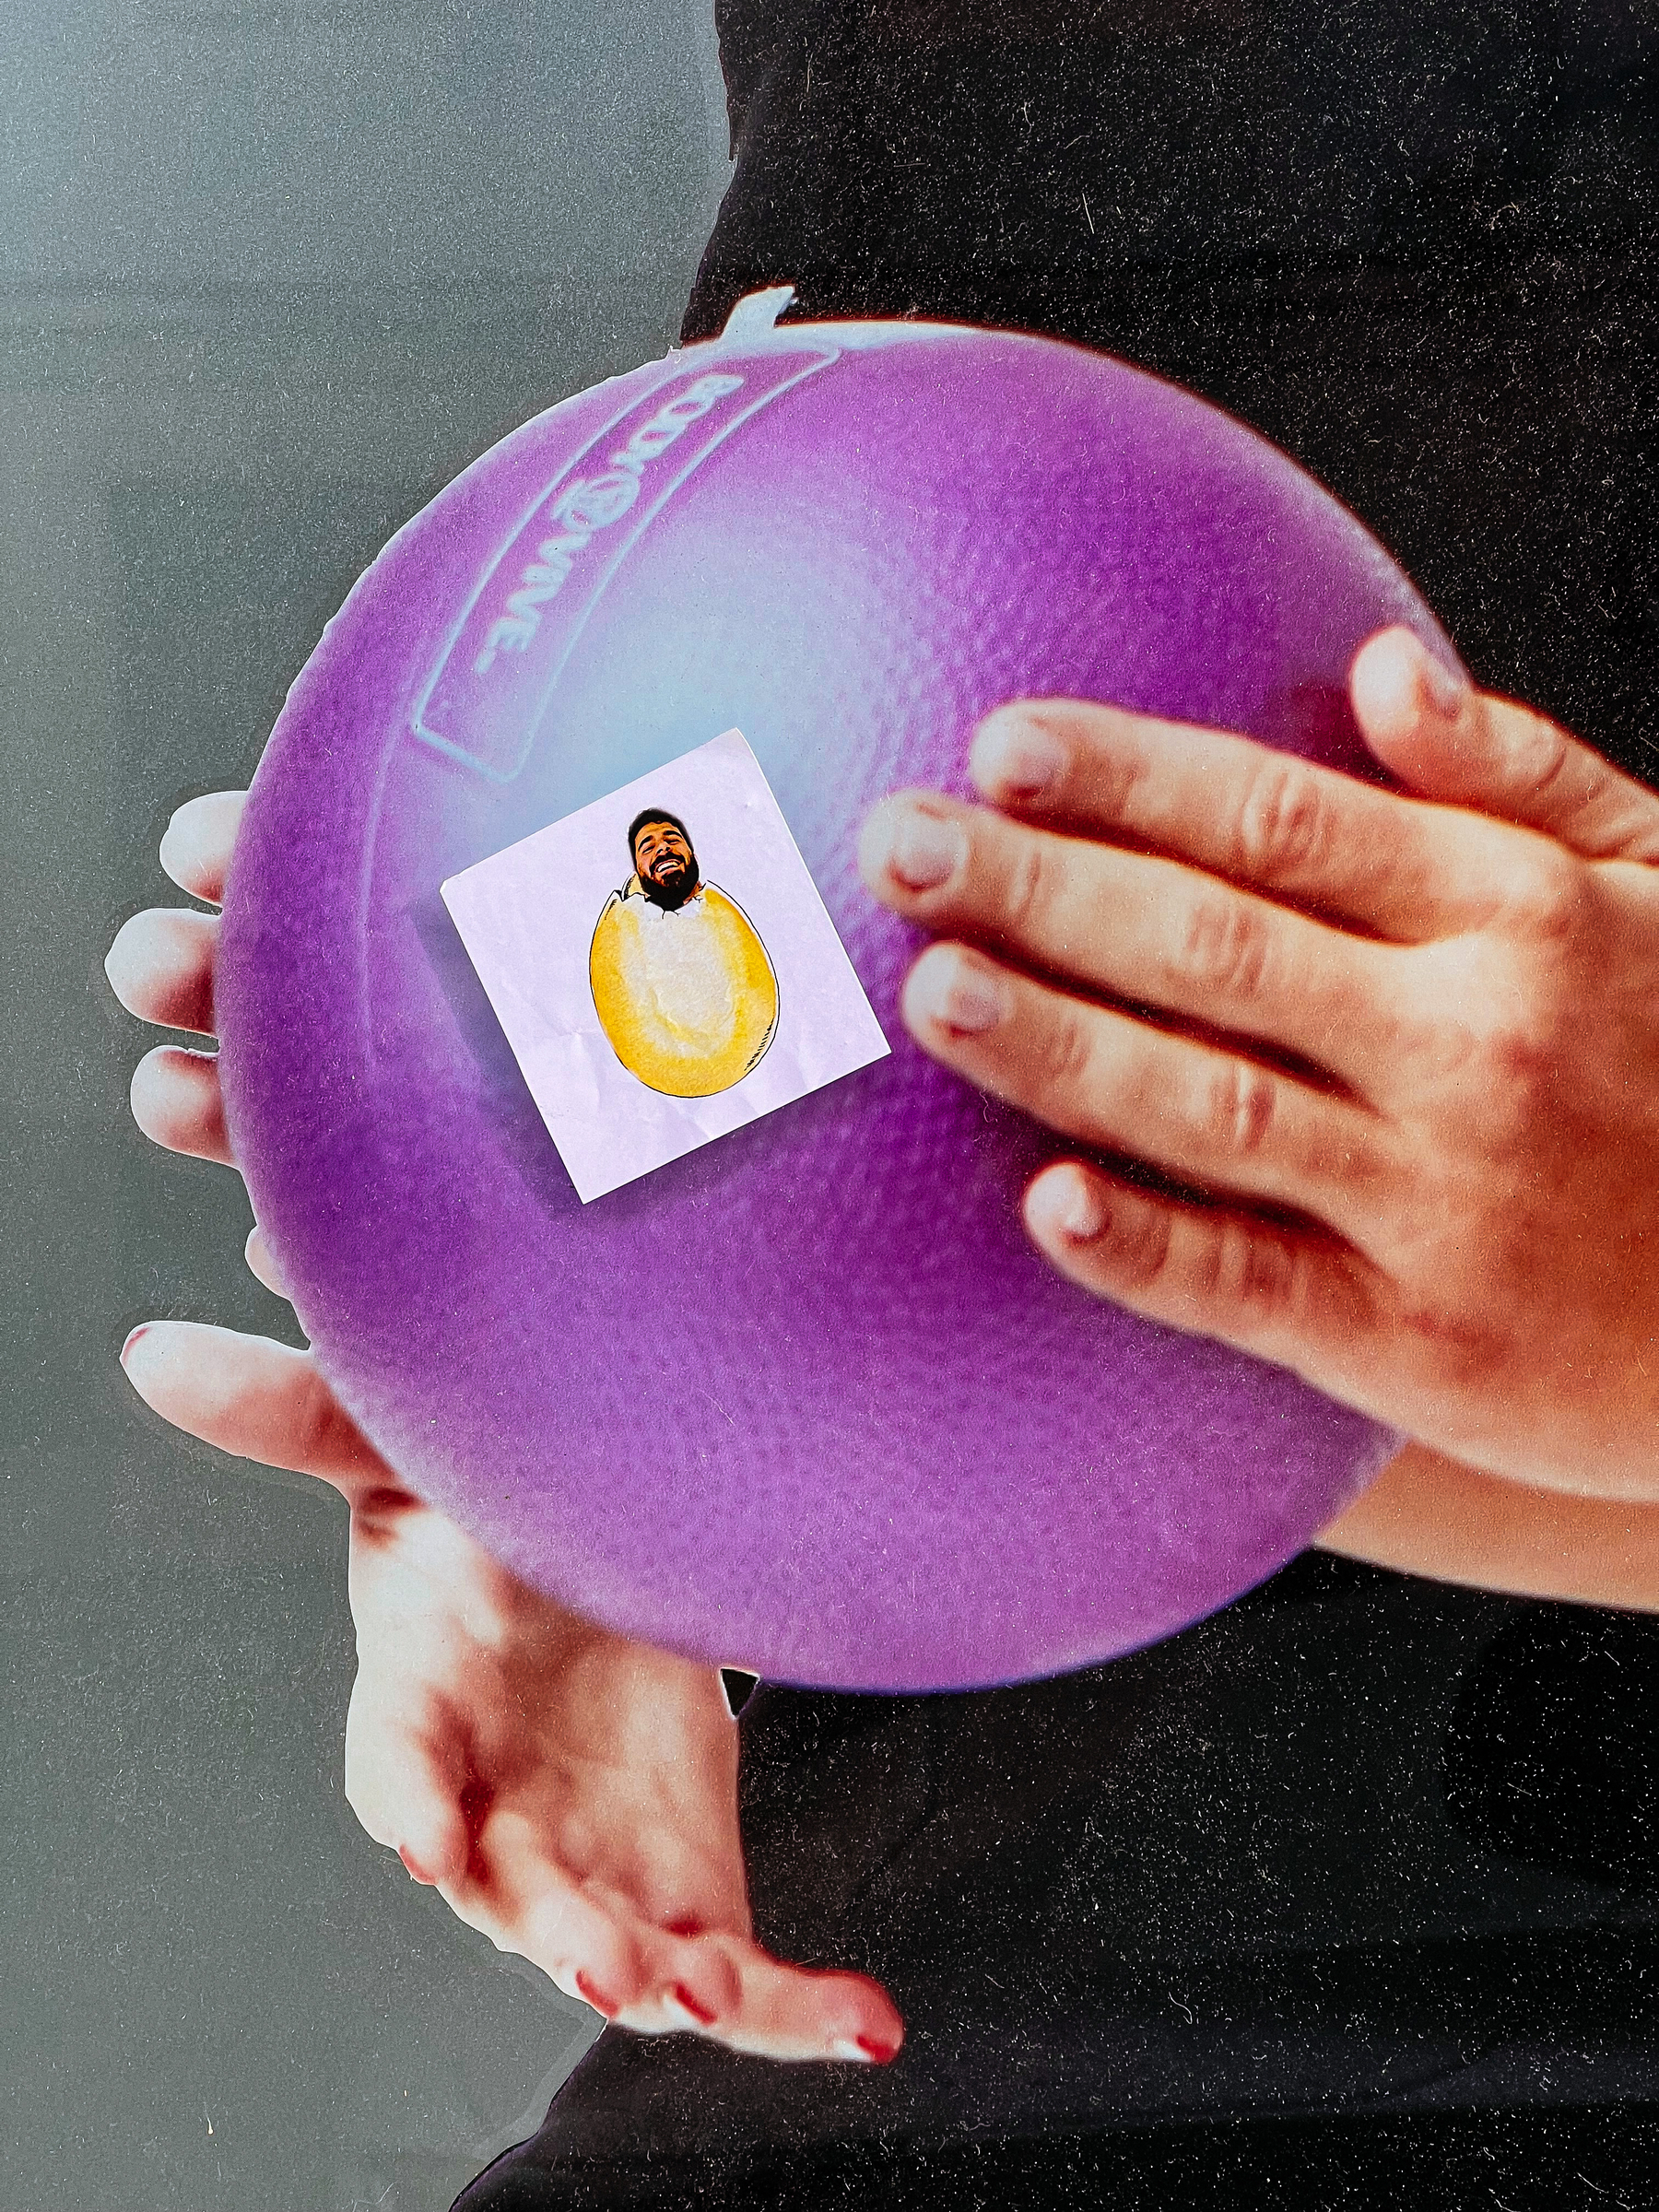 A sticker of a bearded man’s head sticking out of an egg is glued onto a photo of hands holding a purple ball. Odd, but true. 